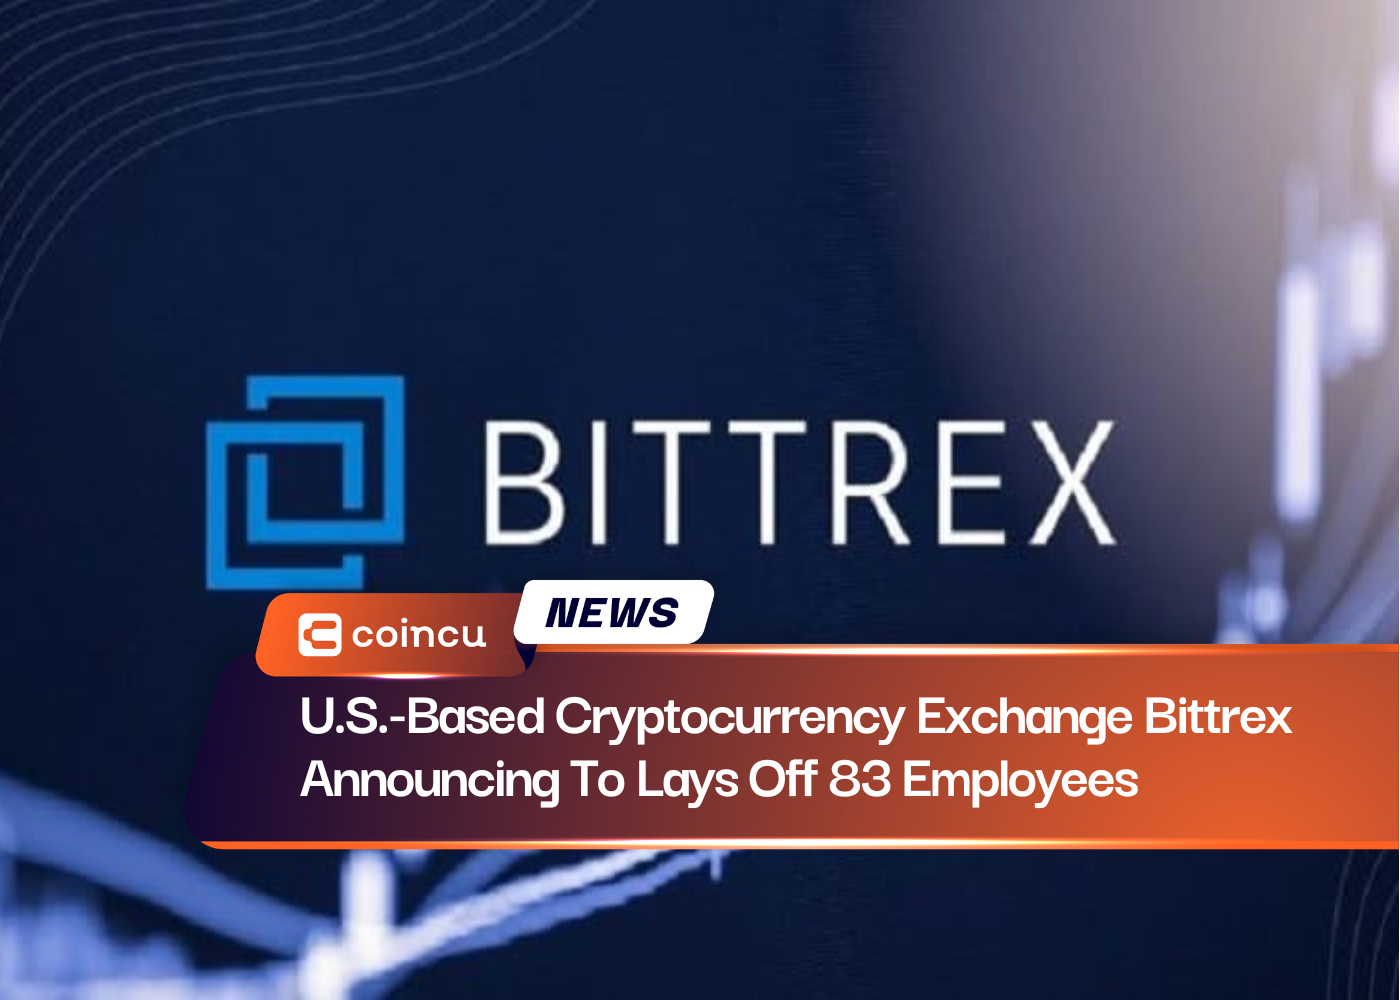 U.S.-Based Cryptocurrency Exchange Bittrex Announcing To Lays Off 83 Employees